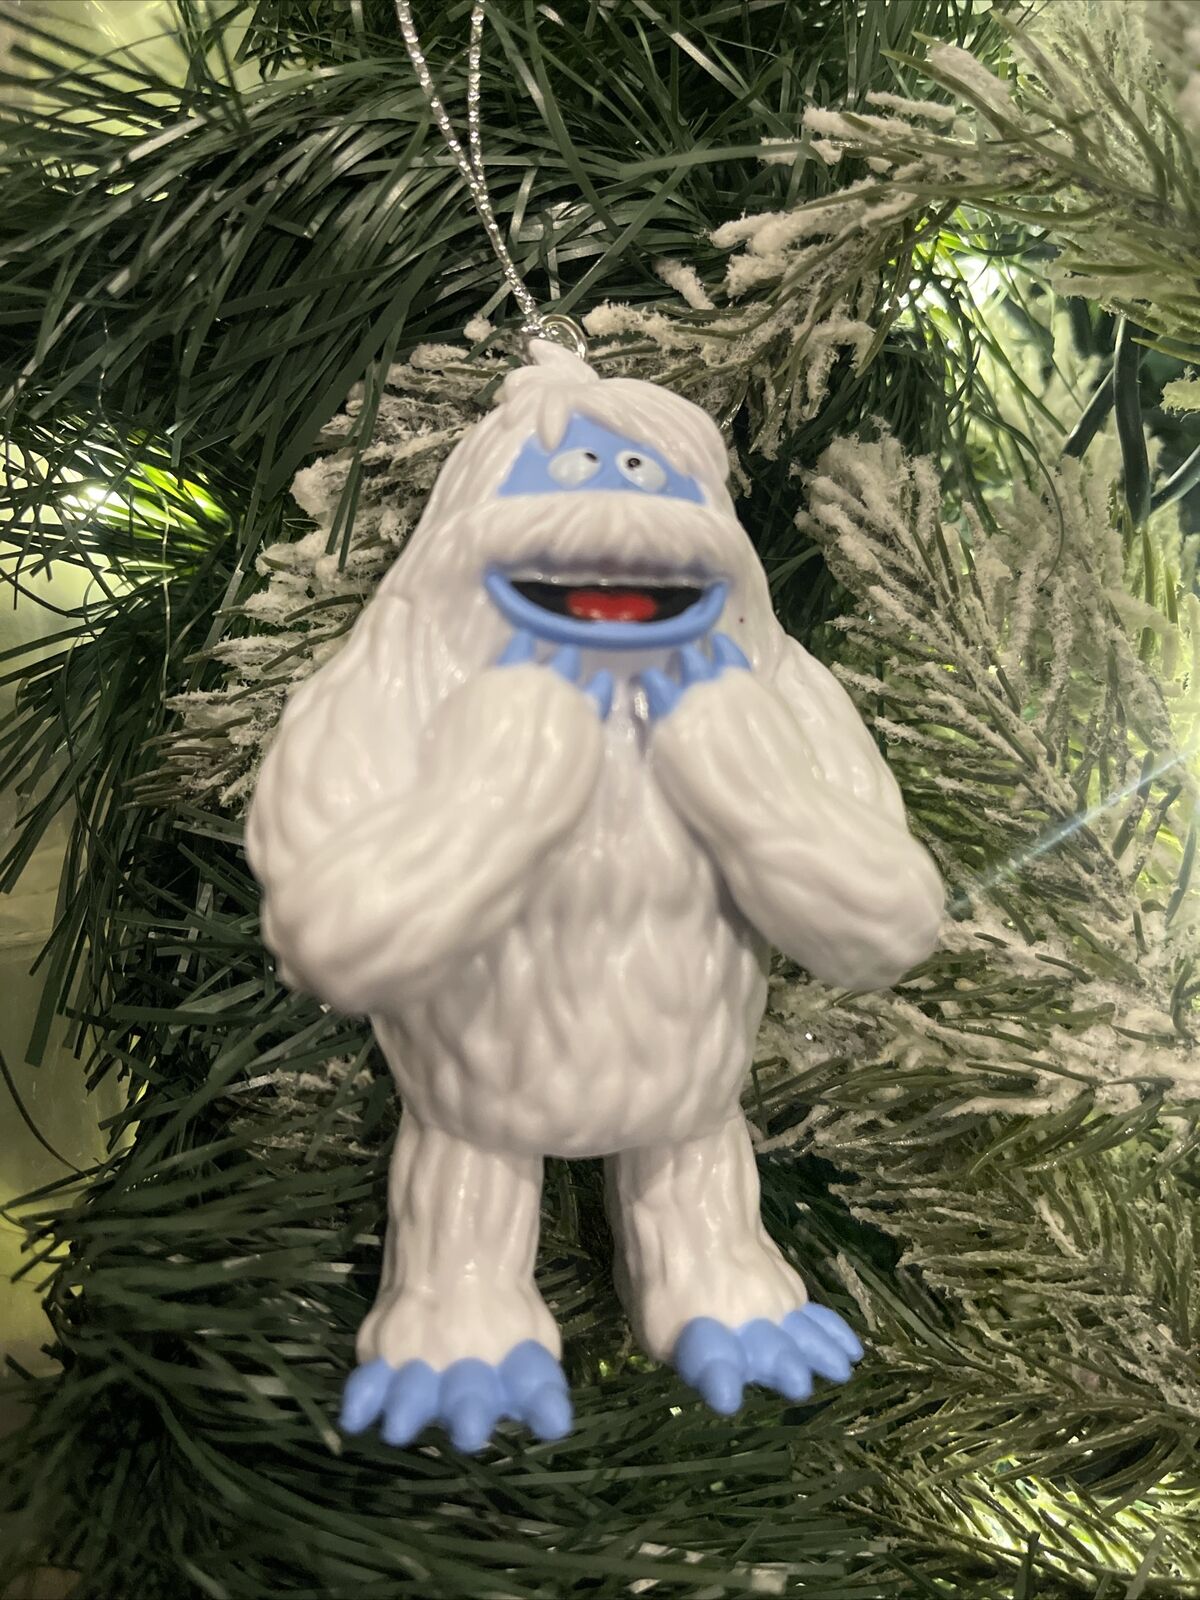 2023 LARGE Bumbles Abominable Snowman Christmas Ornament Rudolph Reindeer